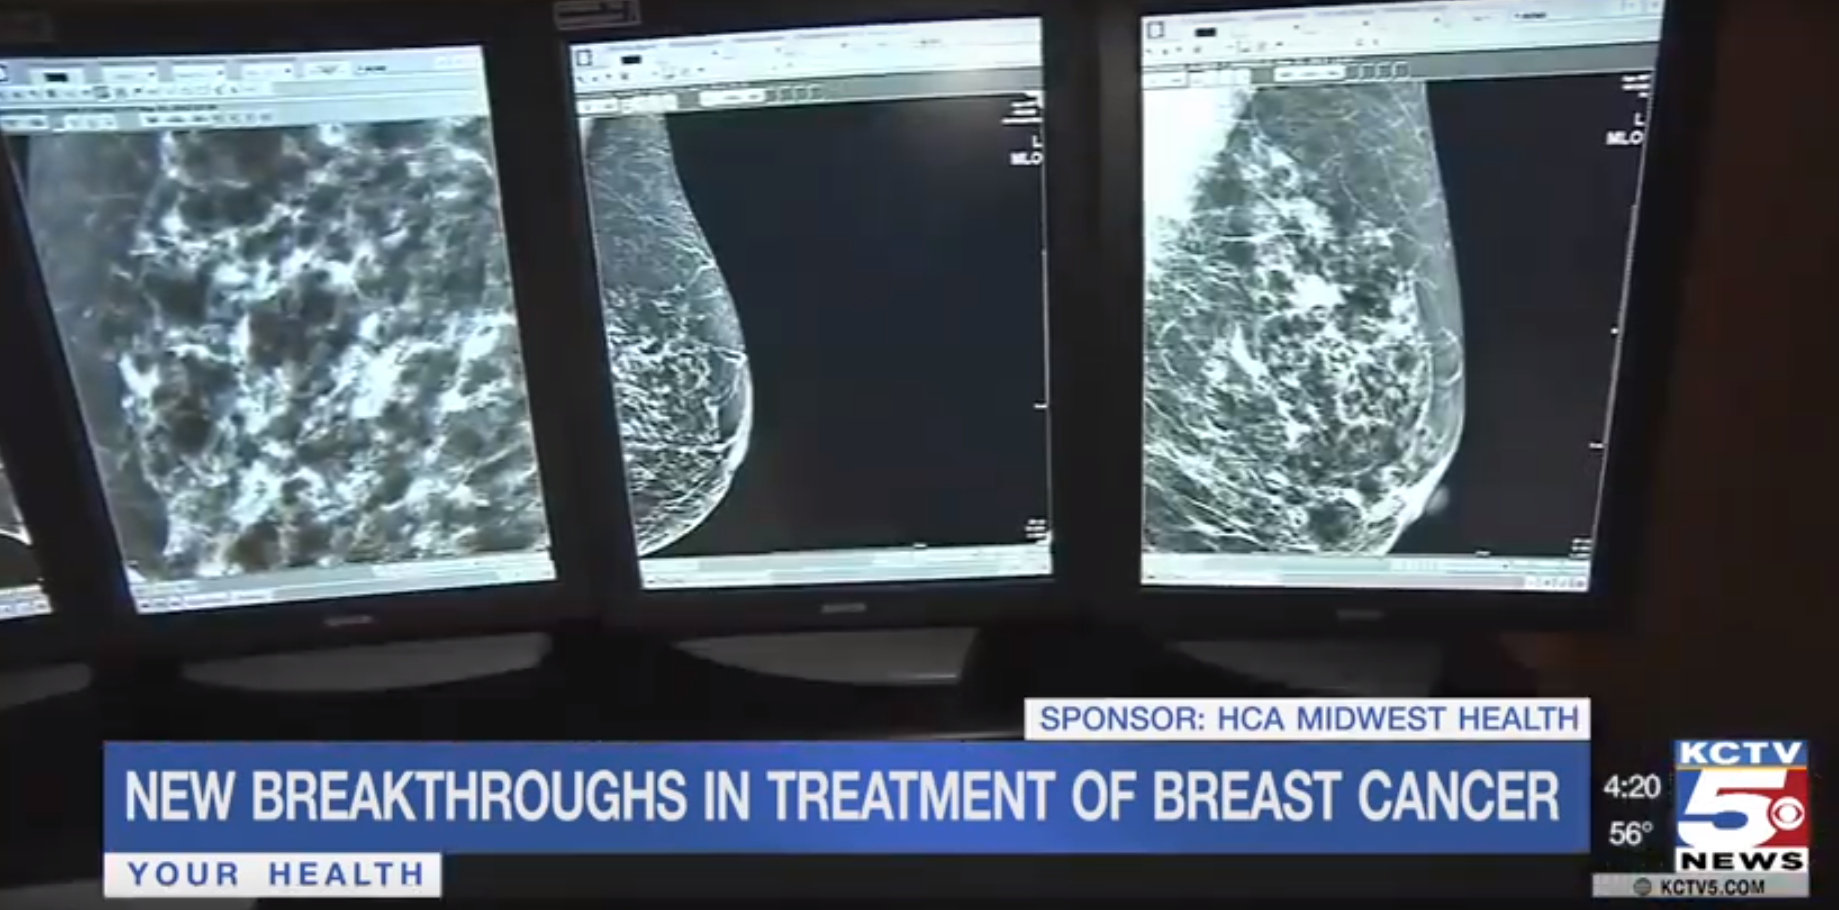 A news segment about breast cancer showing mammogram images